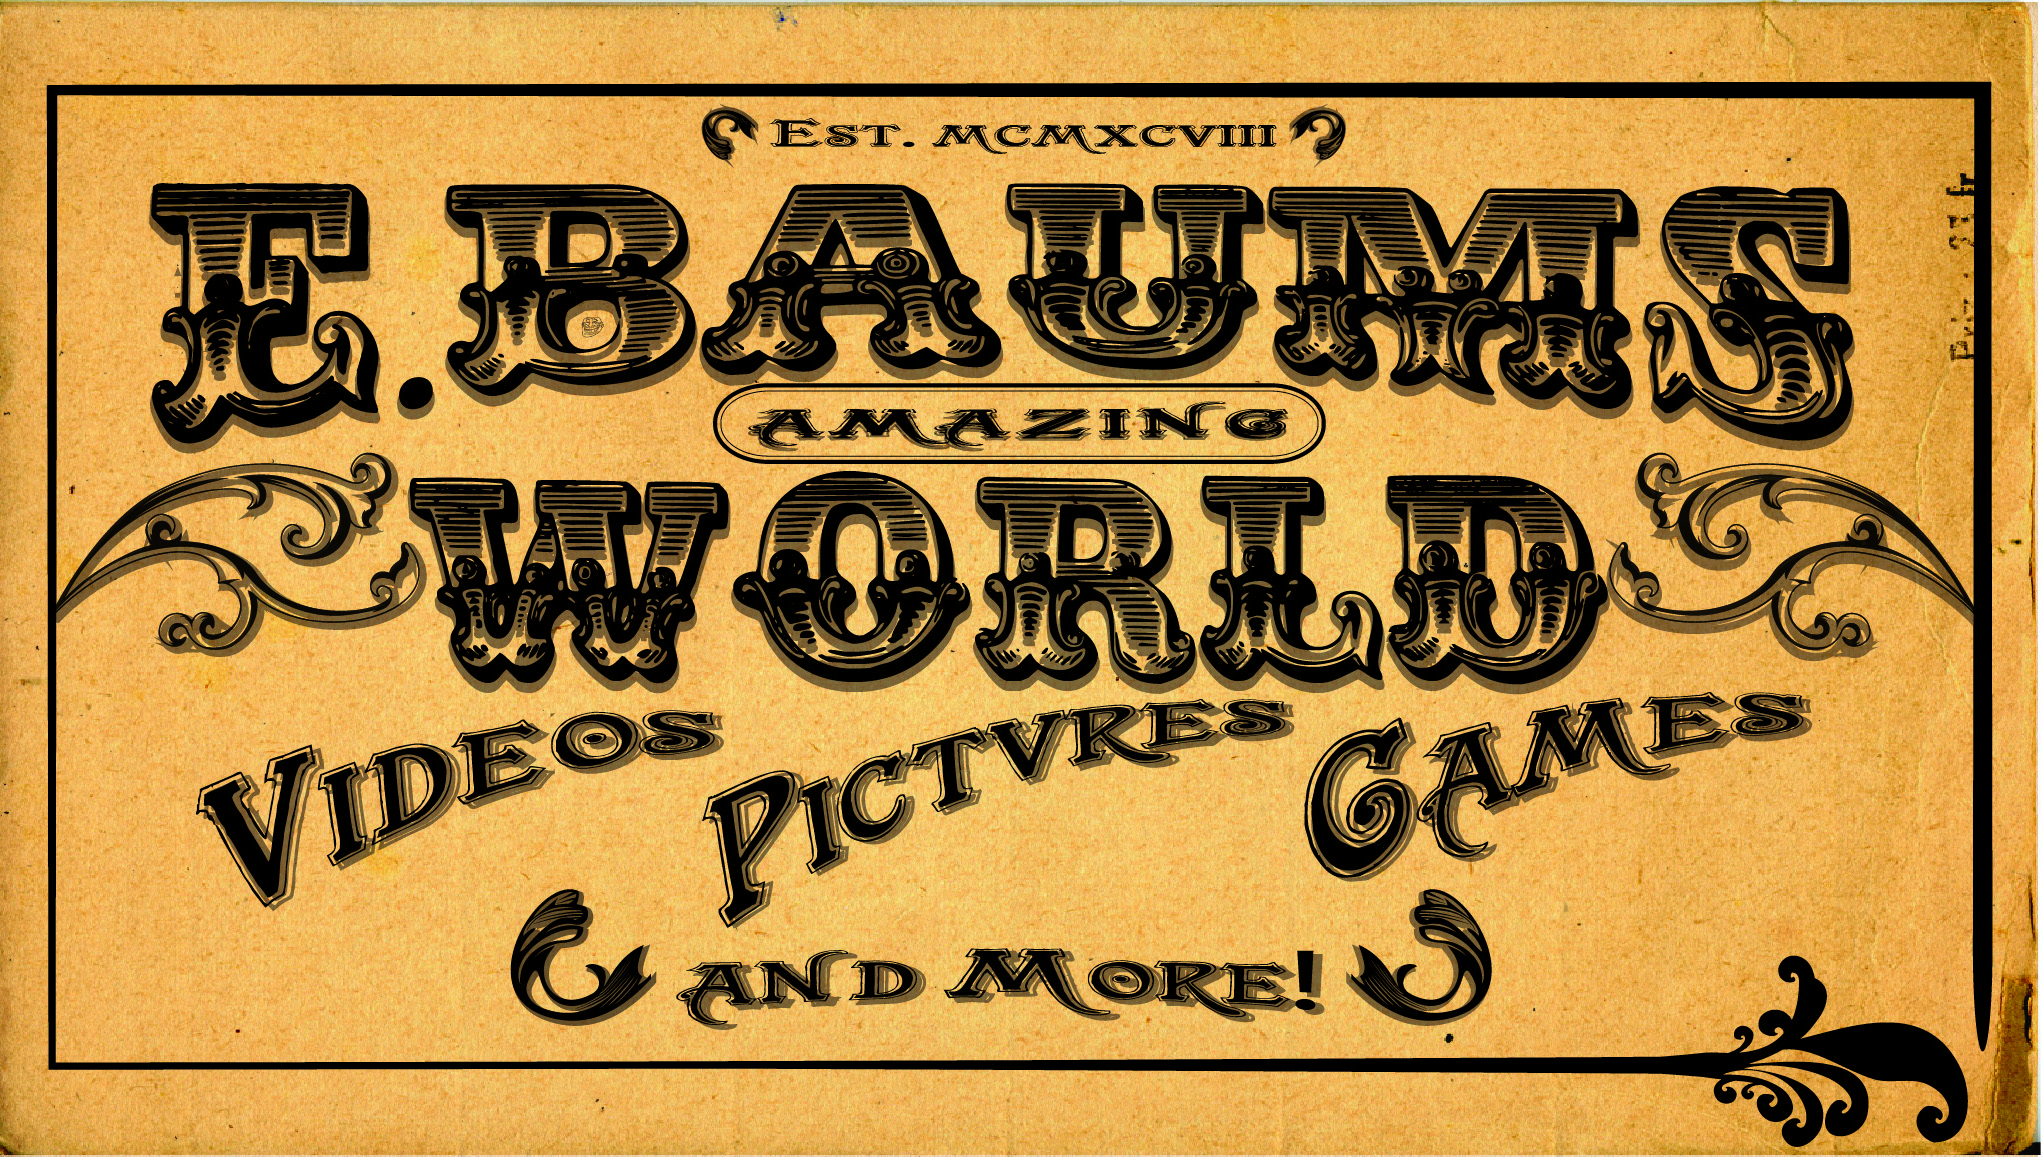 E. Baums Amazing World is a wonder of the modern age. 

The magic is in the B -